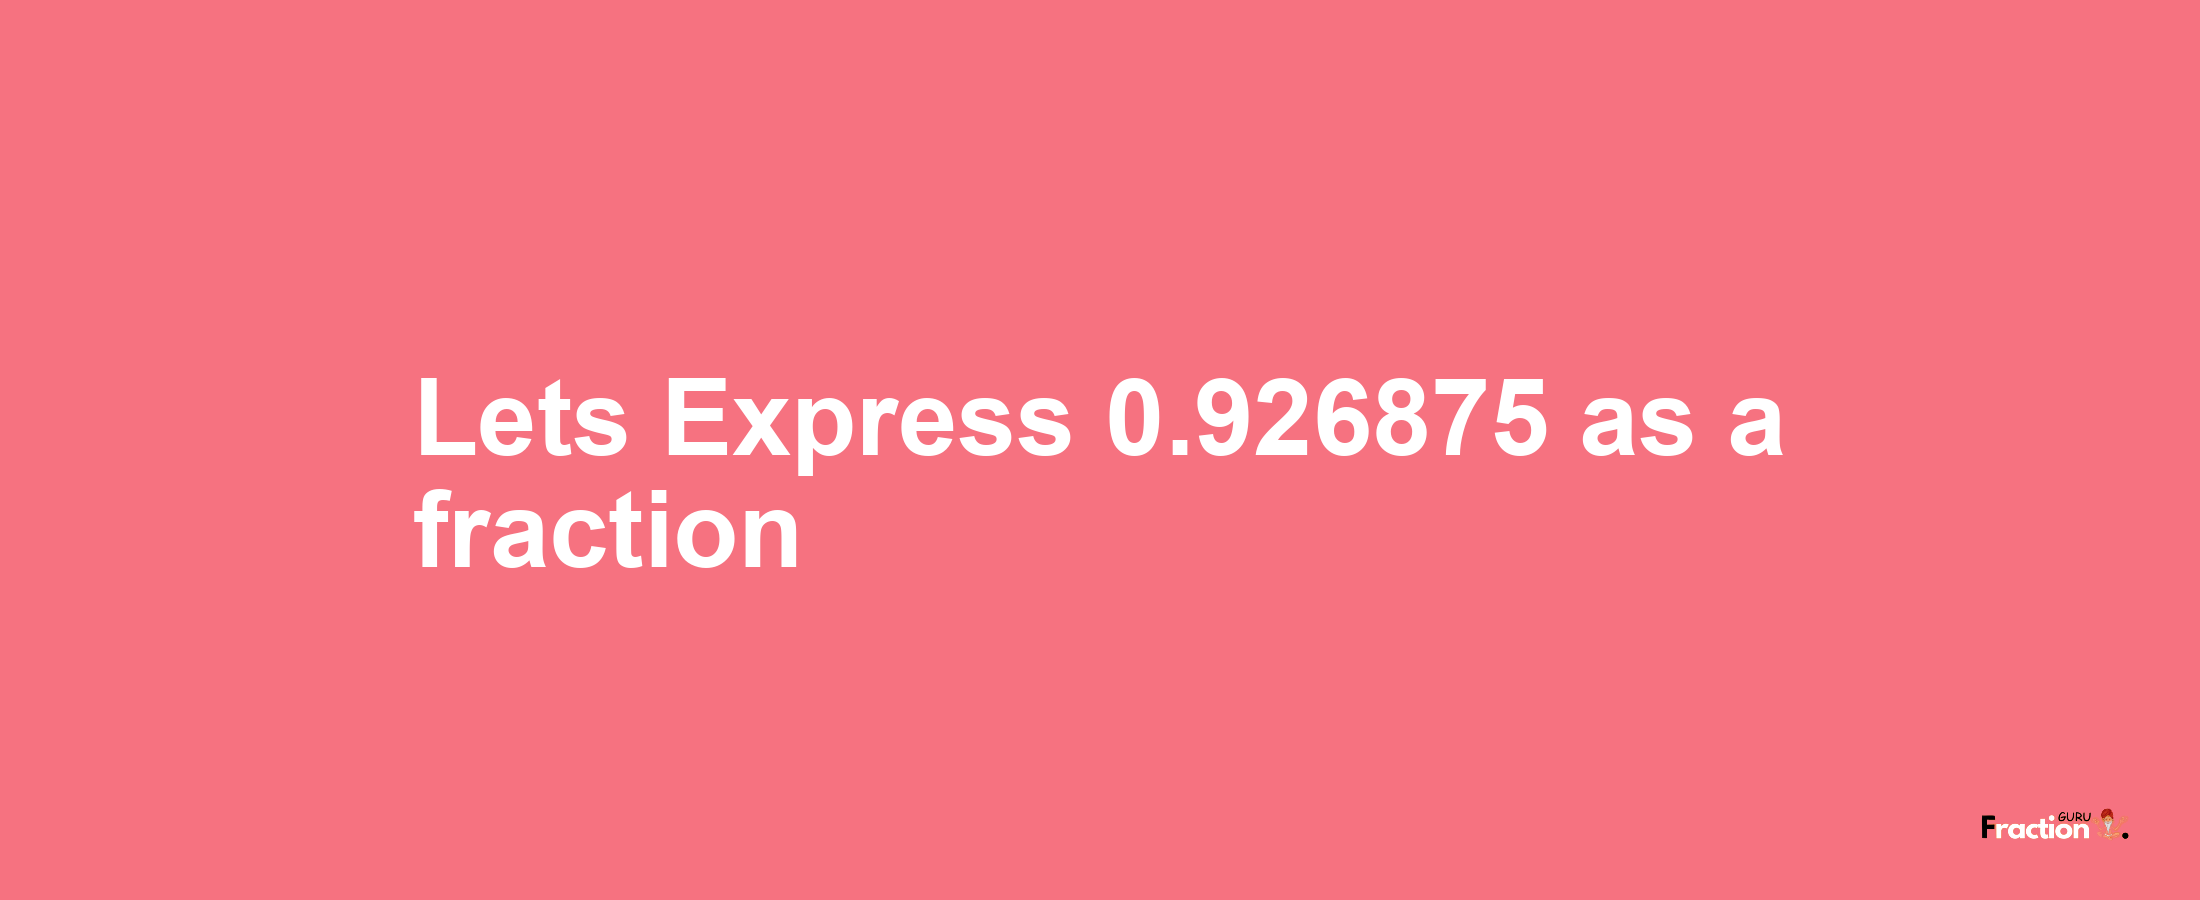 Lets Express 0.926875 as afraction